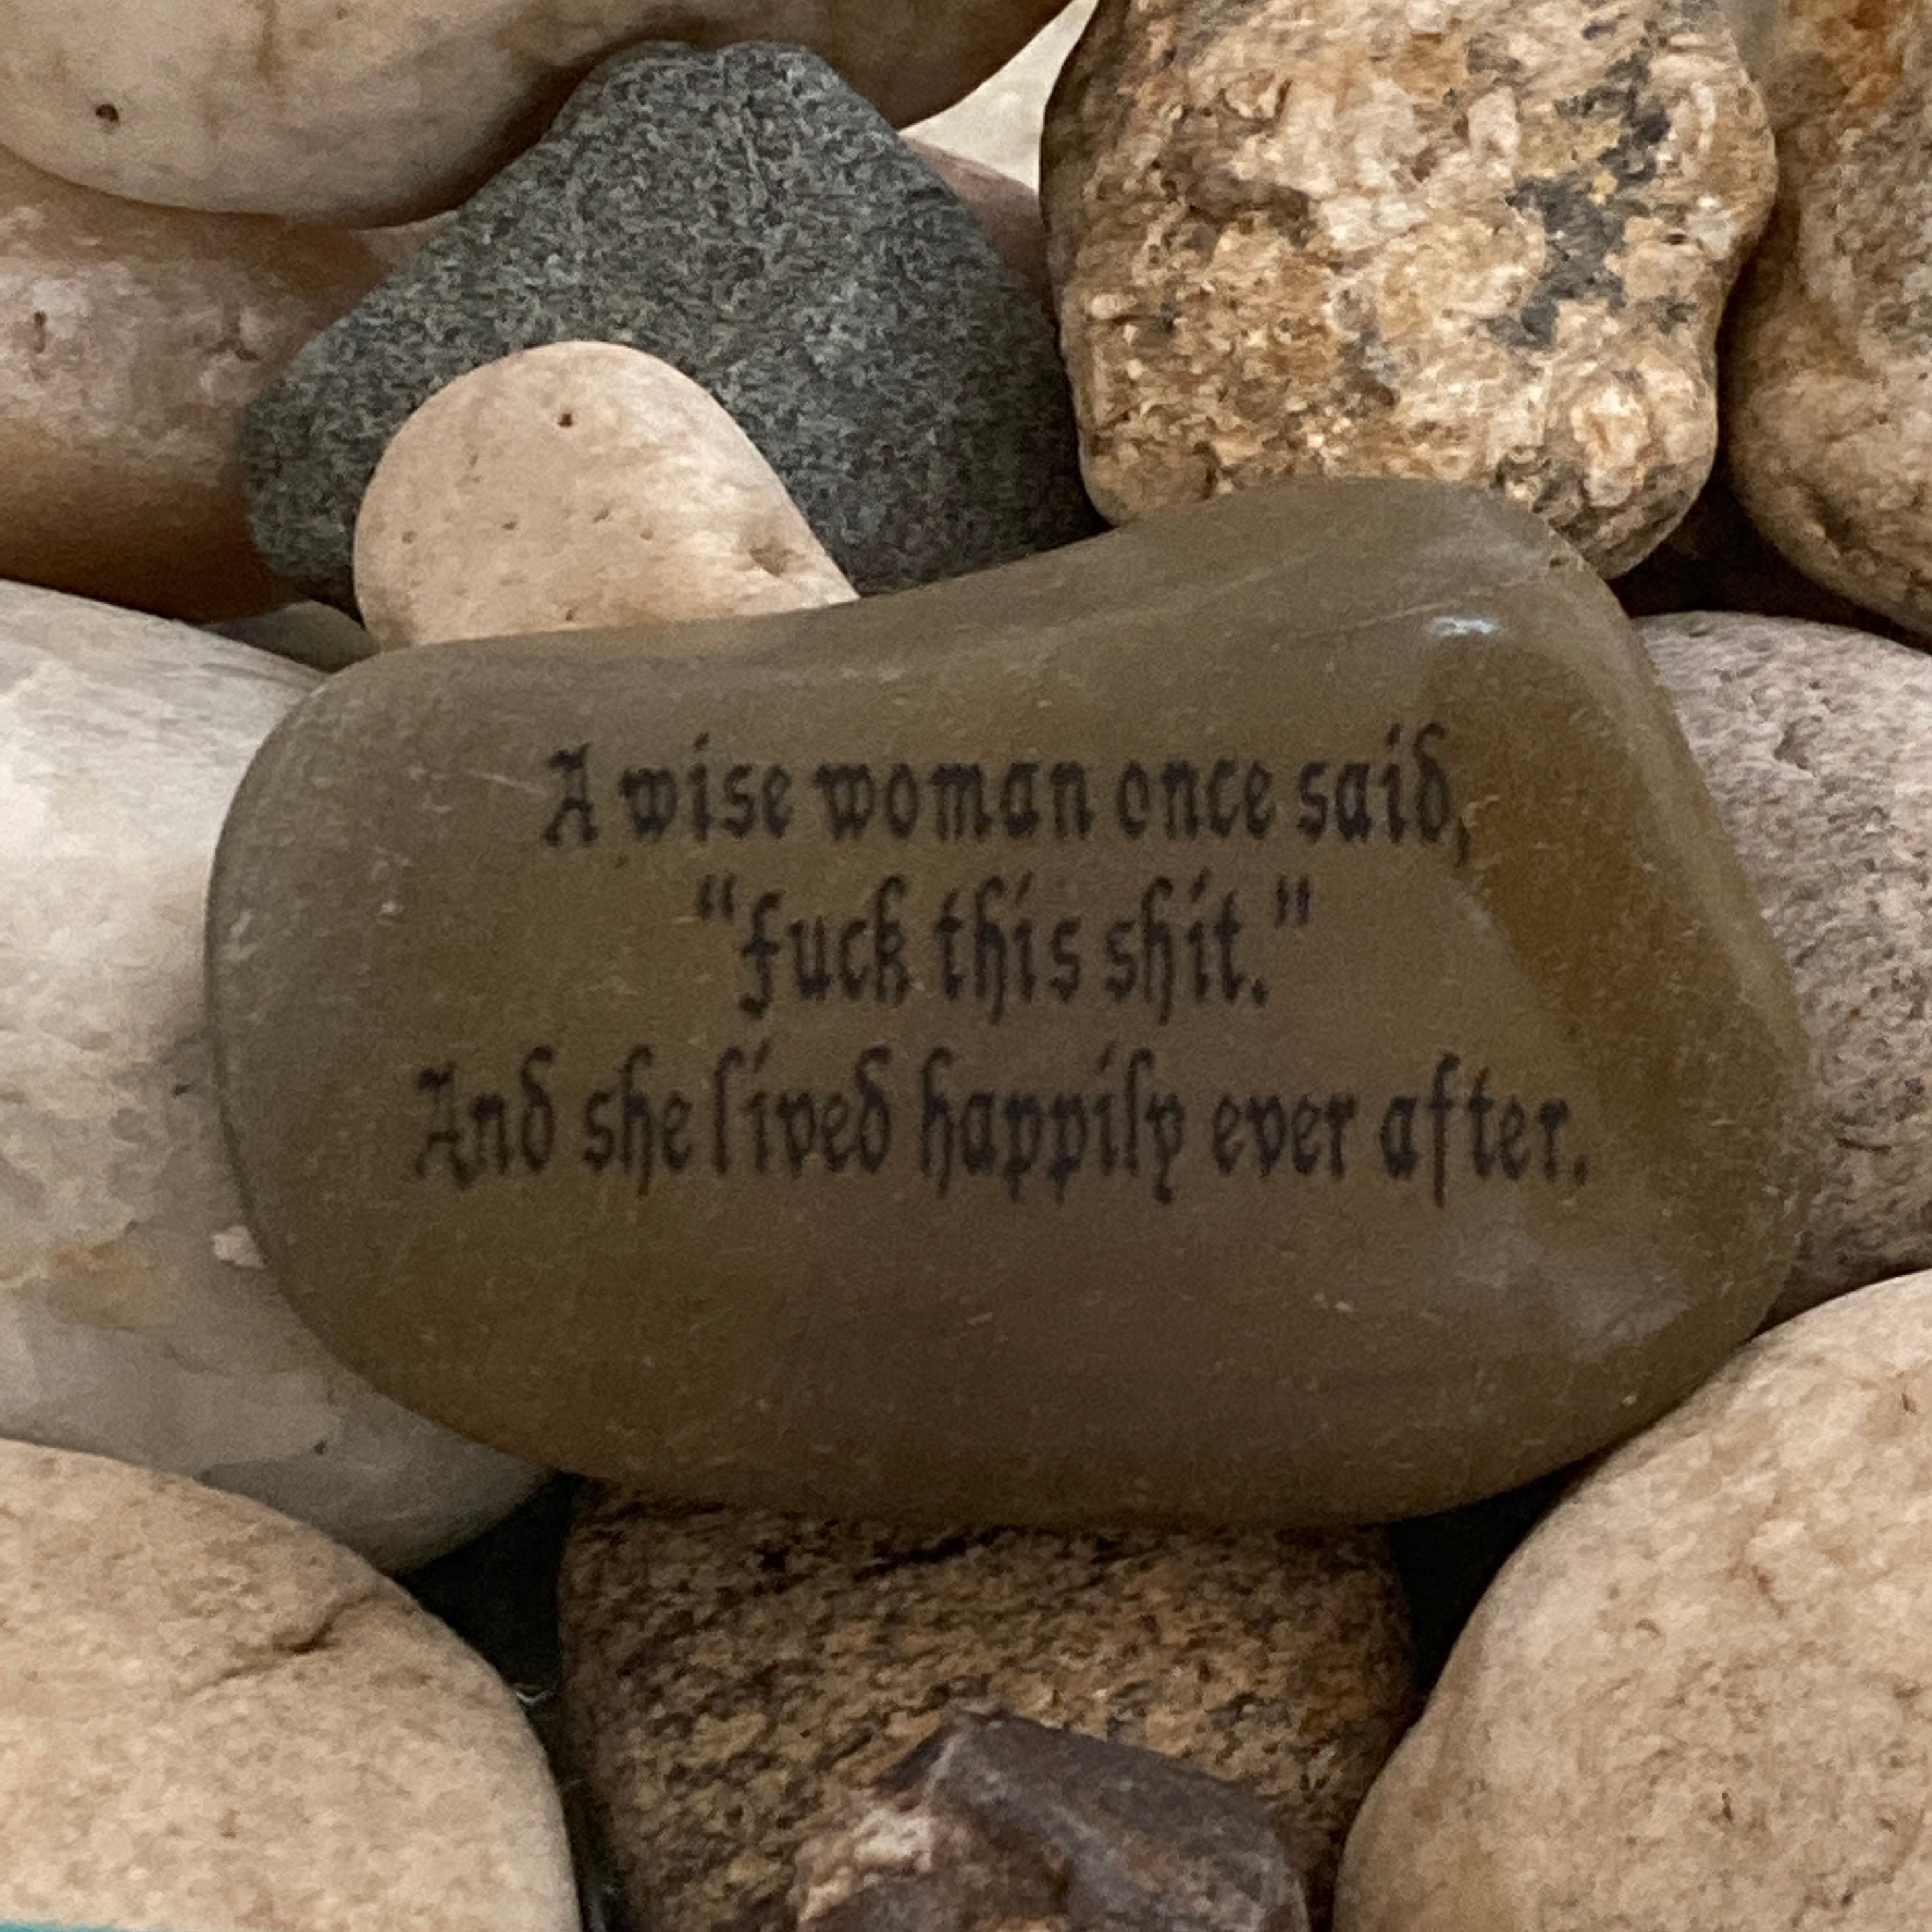 A Wise Woman Once Said Fuck This Shit And She Lived Happily Ever After ~ Engraved Rock